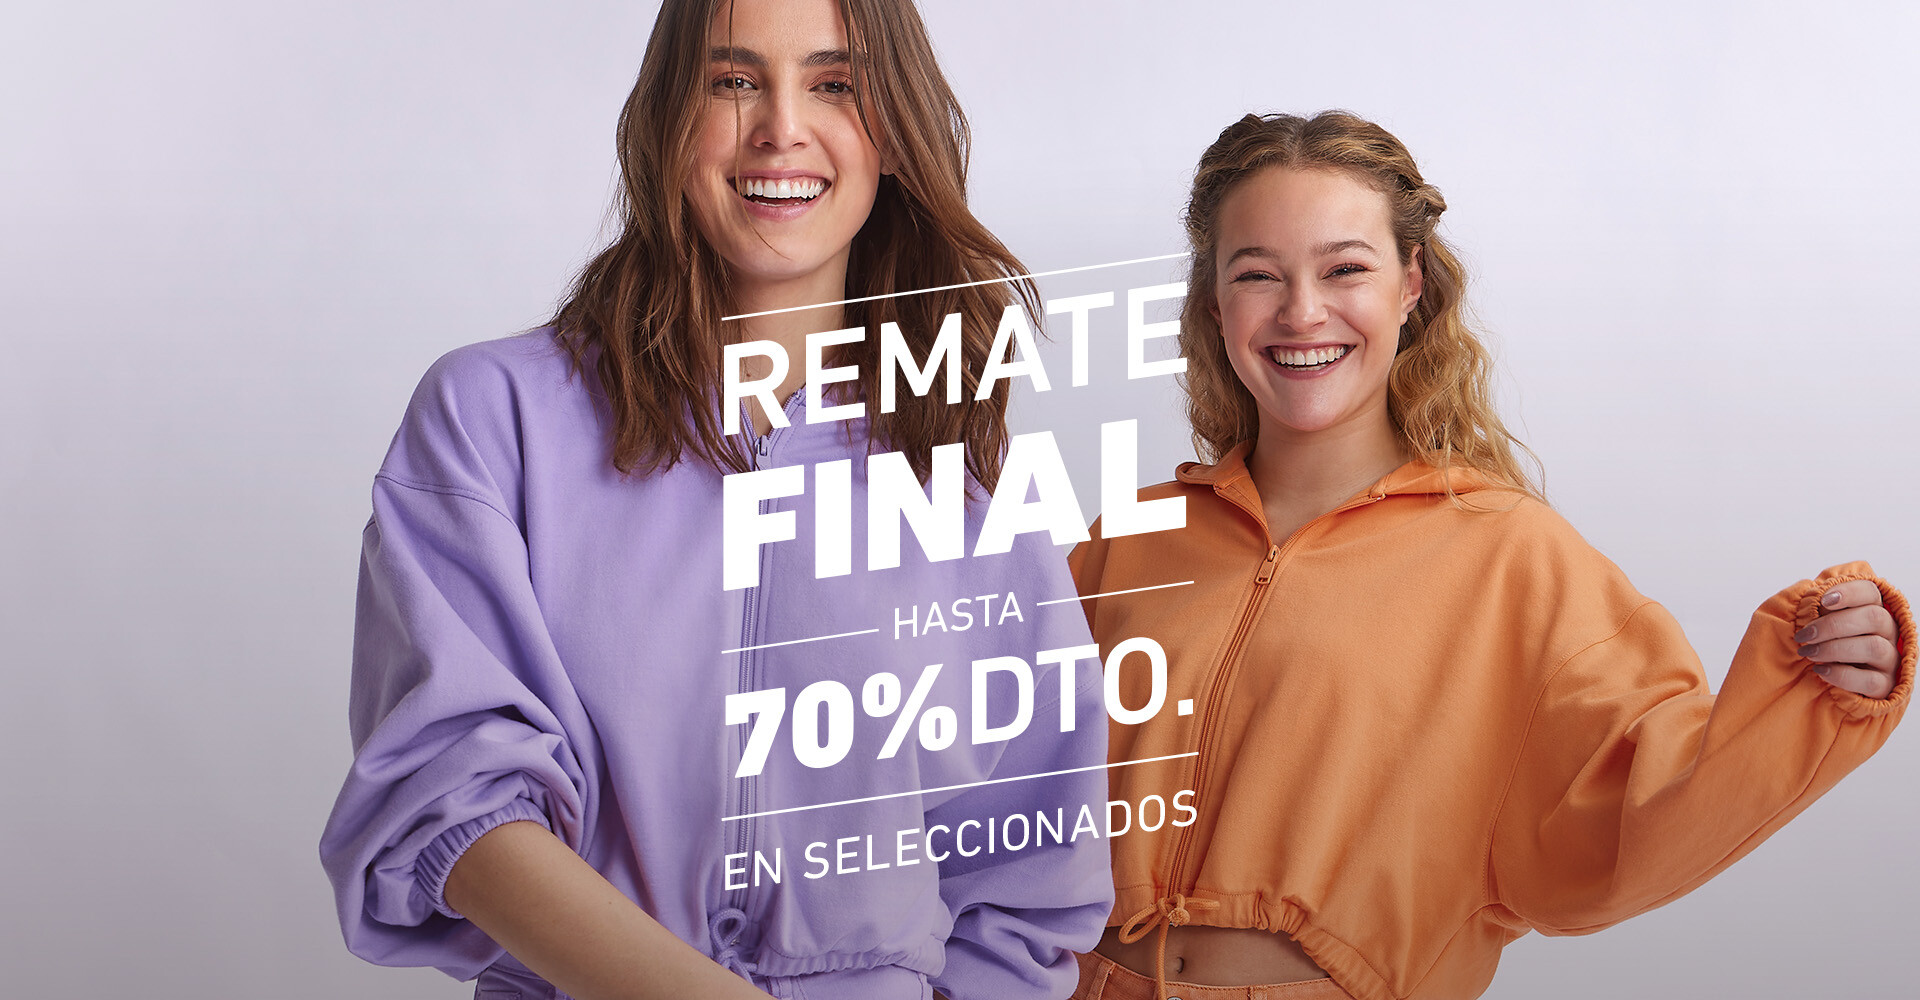 Remate final